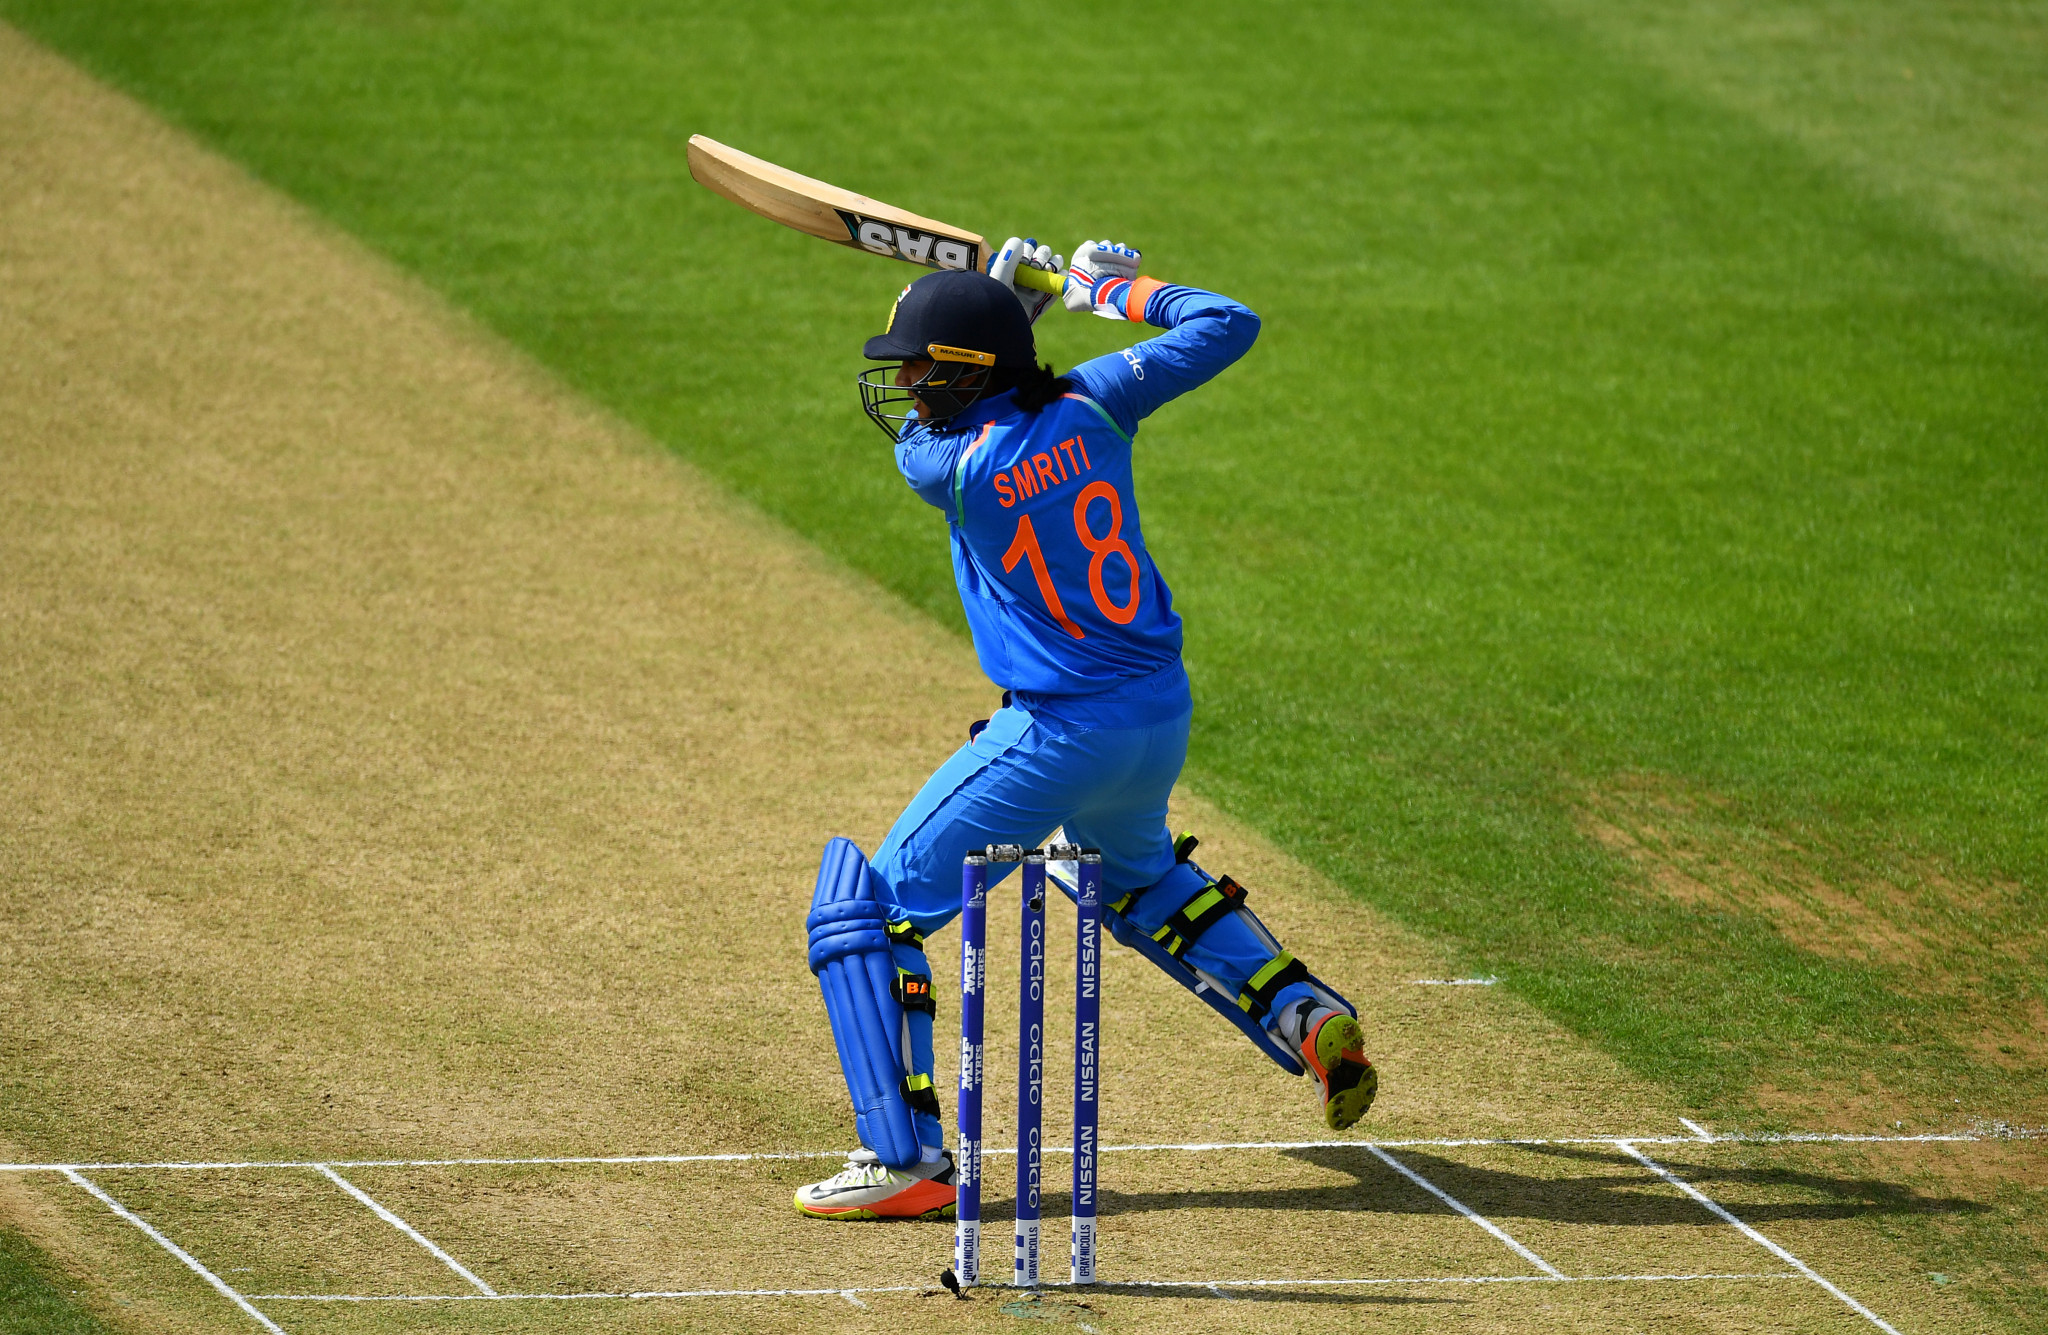 India's Smriti Mandhana has been named as the International Cricket Council's Women's Cricketer of the Year ©Getty Images